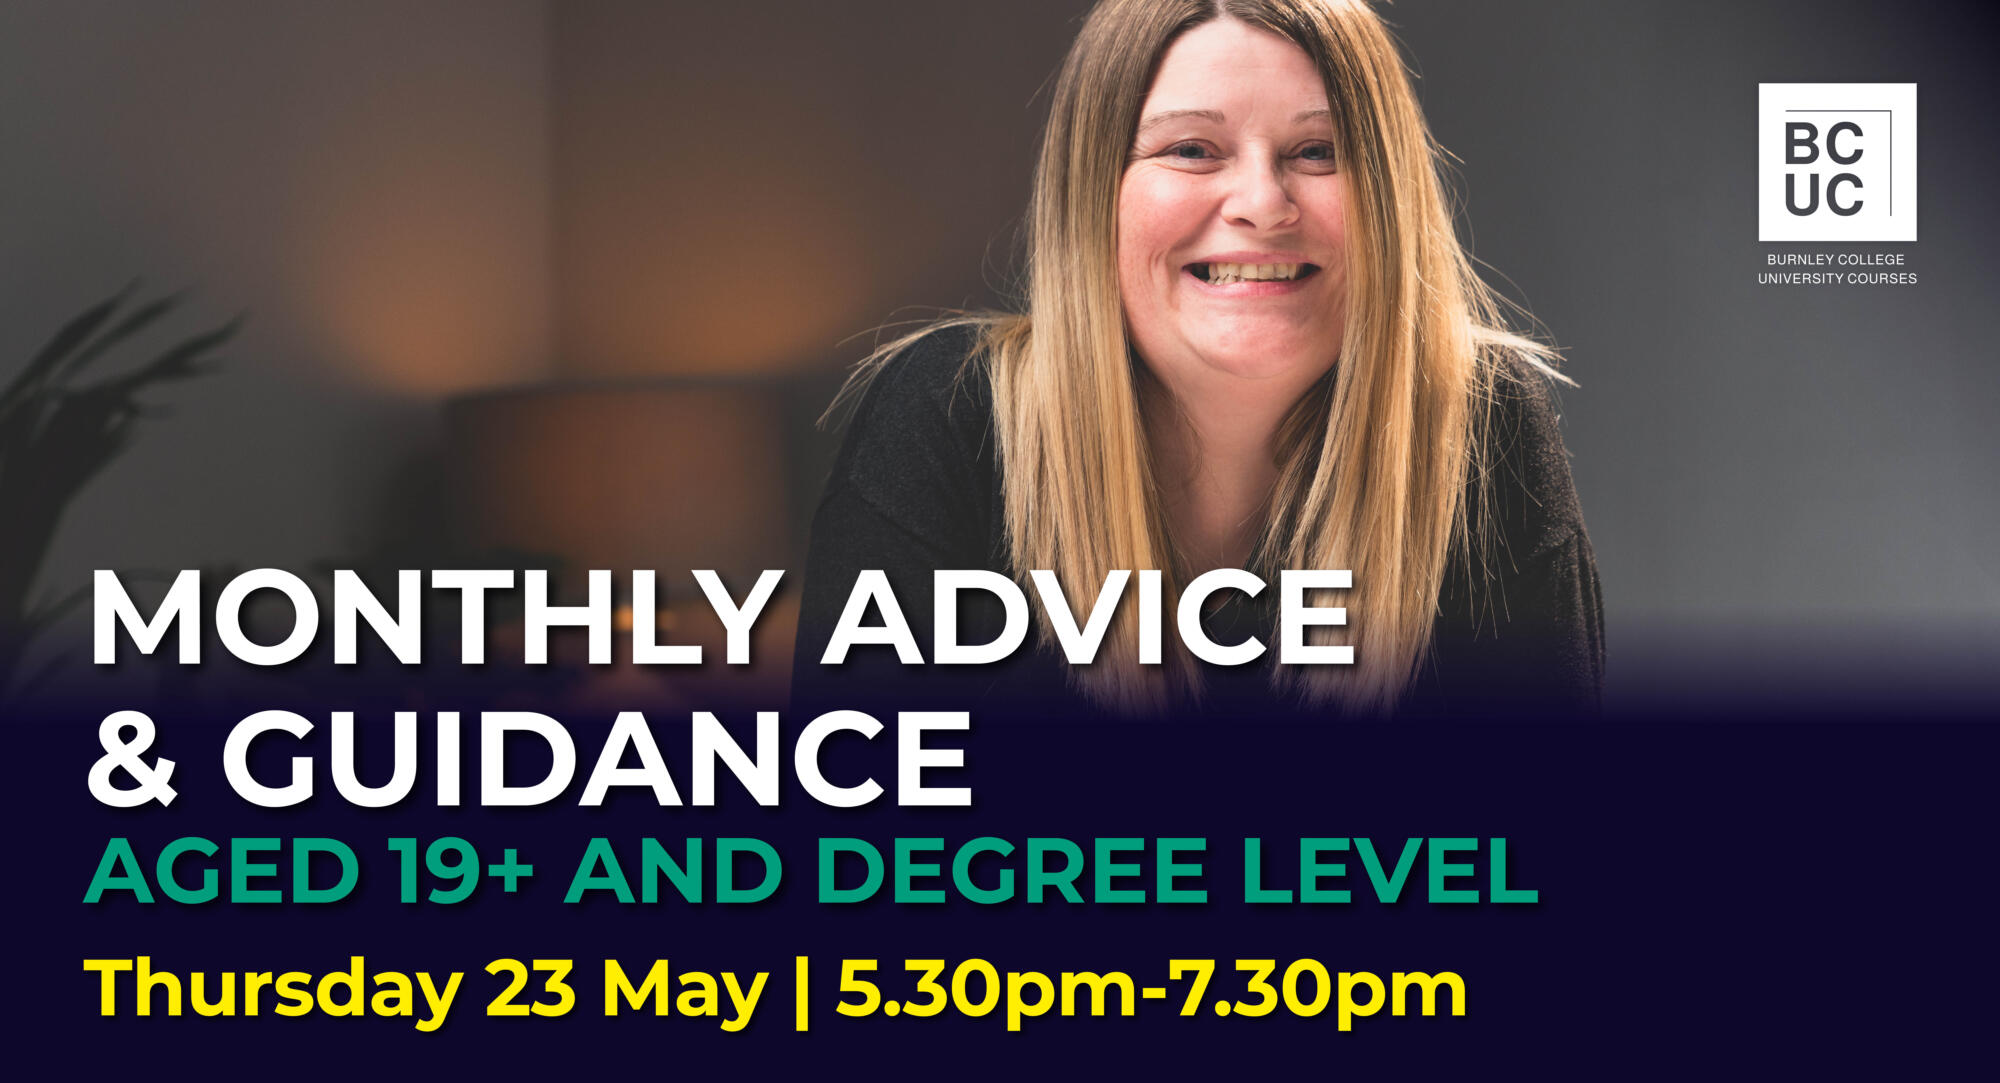 Advice & Guidance Event – Adult Learning and University Courses